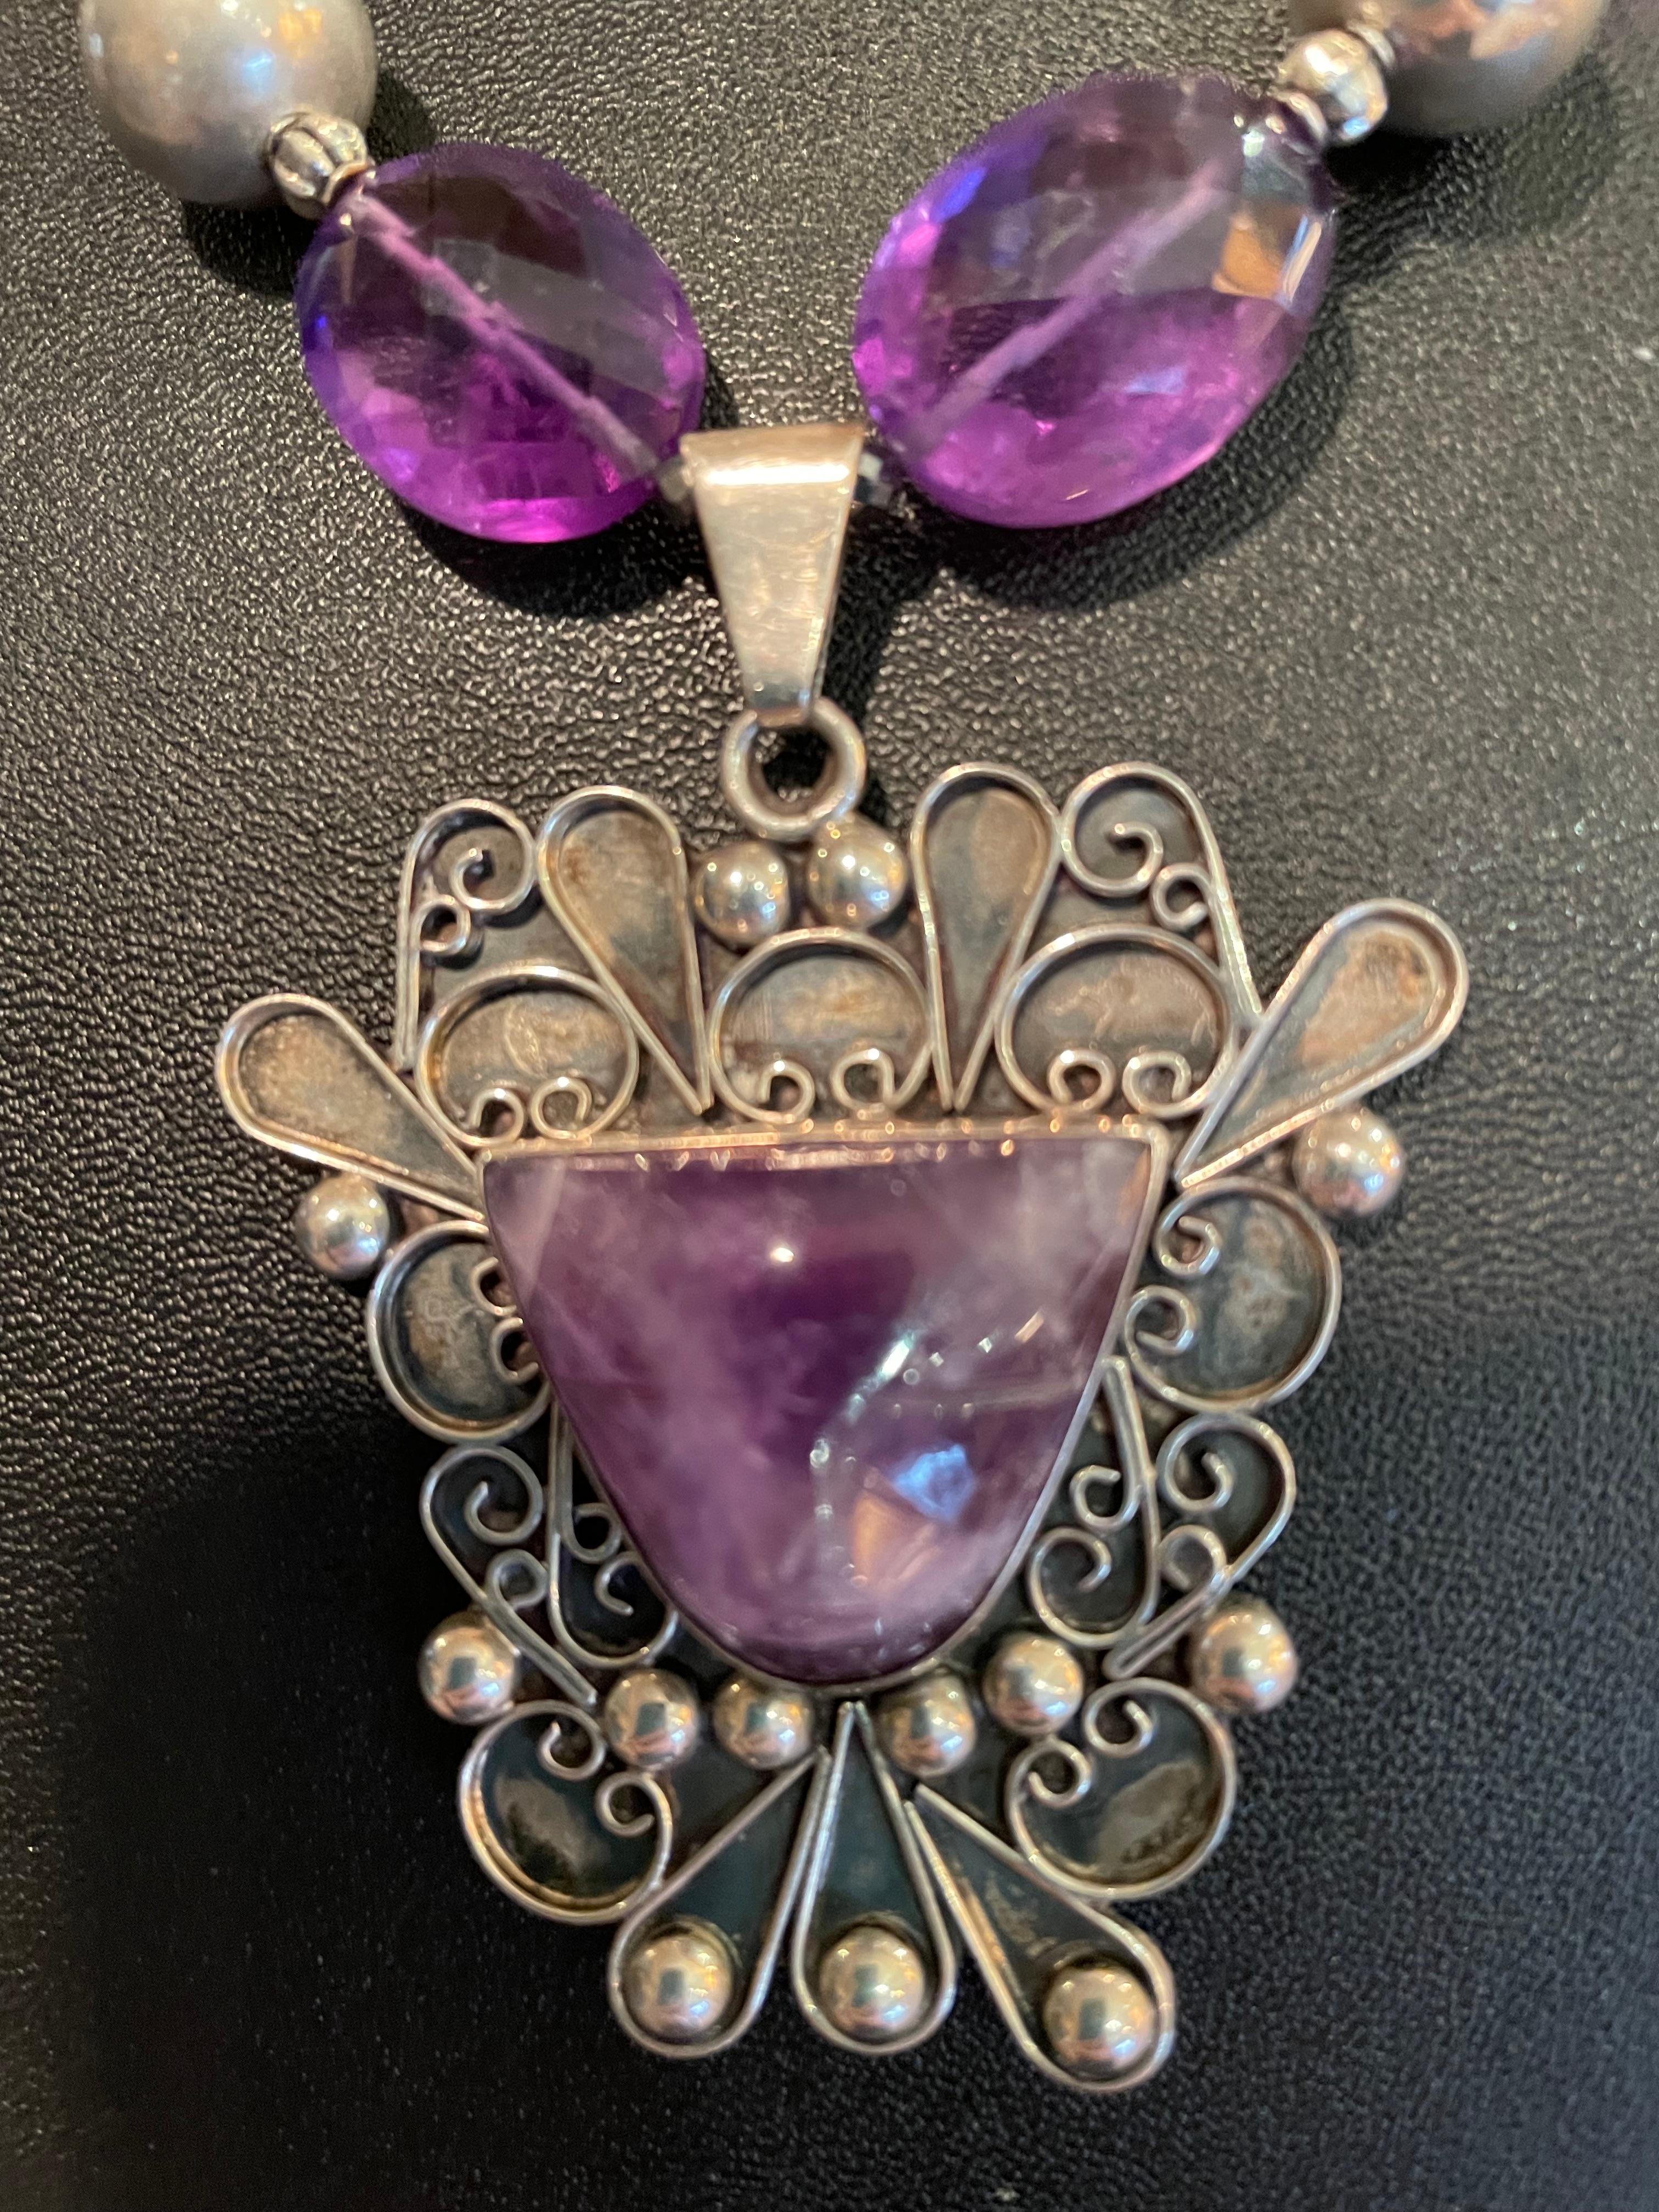 Lorraine’s Bijoux offers a Vintage Mexican Sterling Silver and Amethyst Aztec style Pendant , one of a kind, handmade, Stunning necklace. The Amethyst stone is faceted and pyramidal in shape and is set in intricate Sterling Silver wirework. A yummy